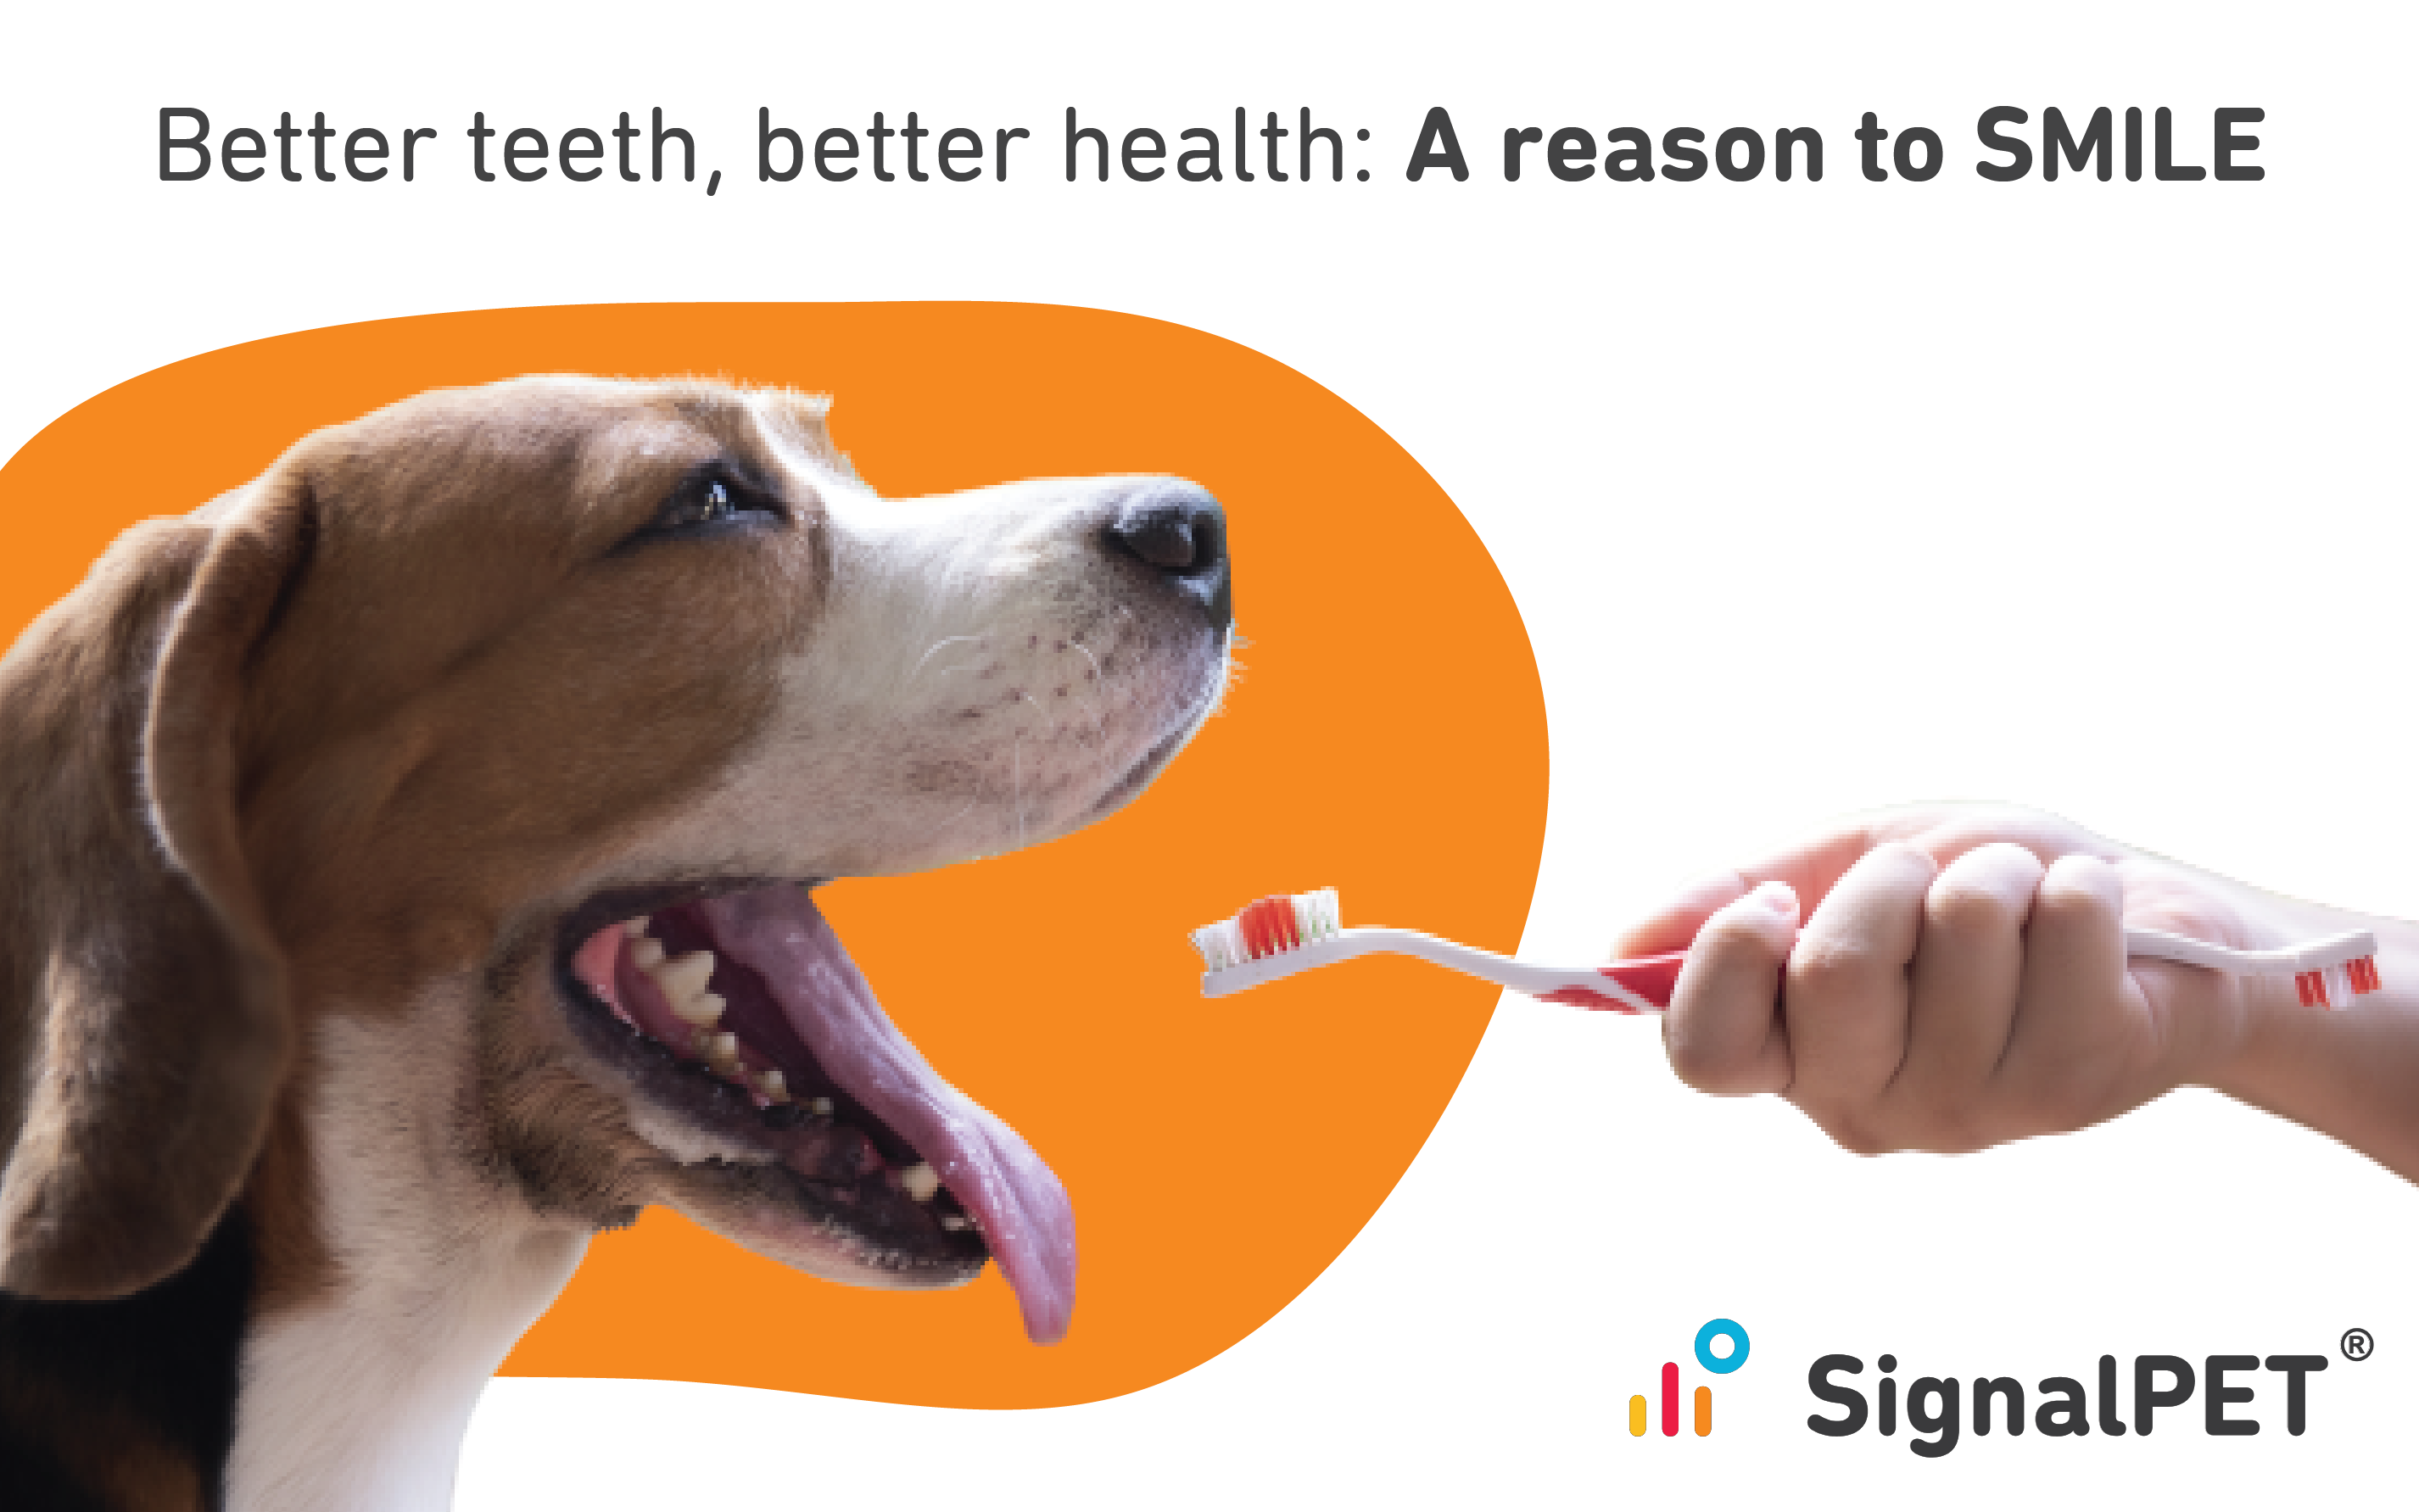 Better teeth, better health. A reason to SMILE.